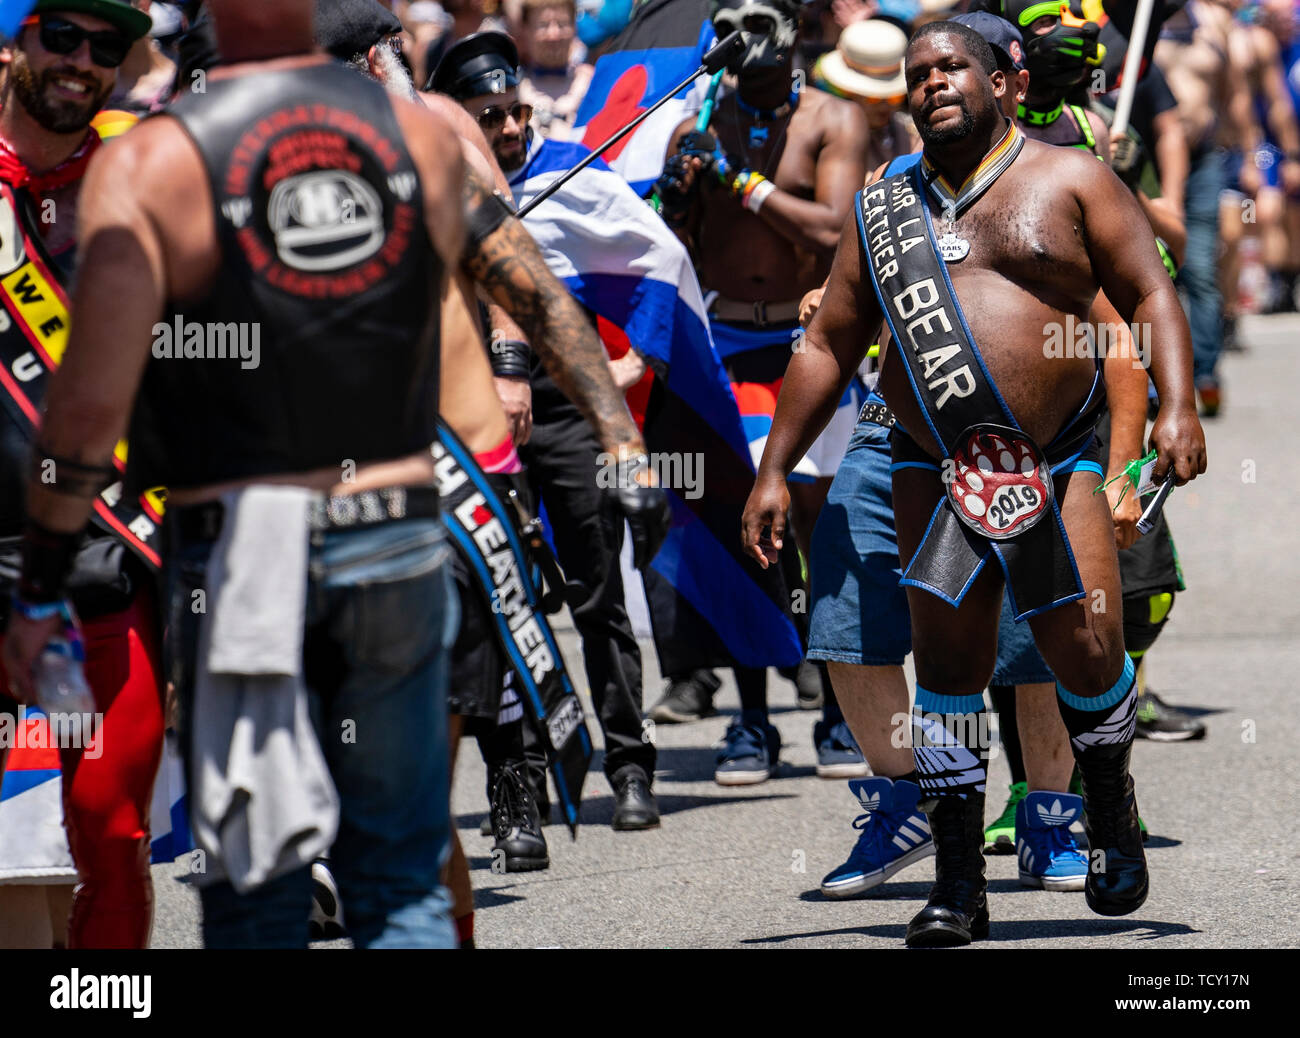 A man wears a sash that says Mr. LA Leather Bear during the LA Pride Parade in West Hollywood, California. The 49th annual gay pride parade includes a music festival and a parade that draws large crowds. Stock Photo